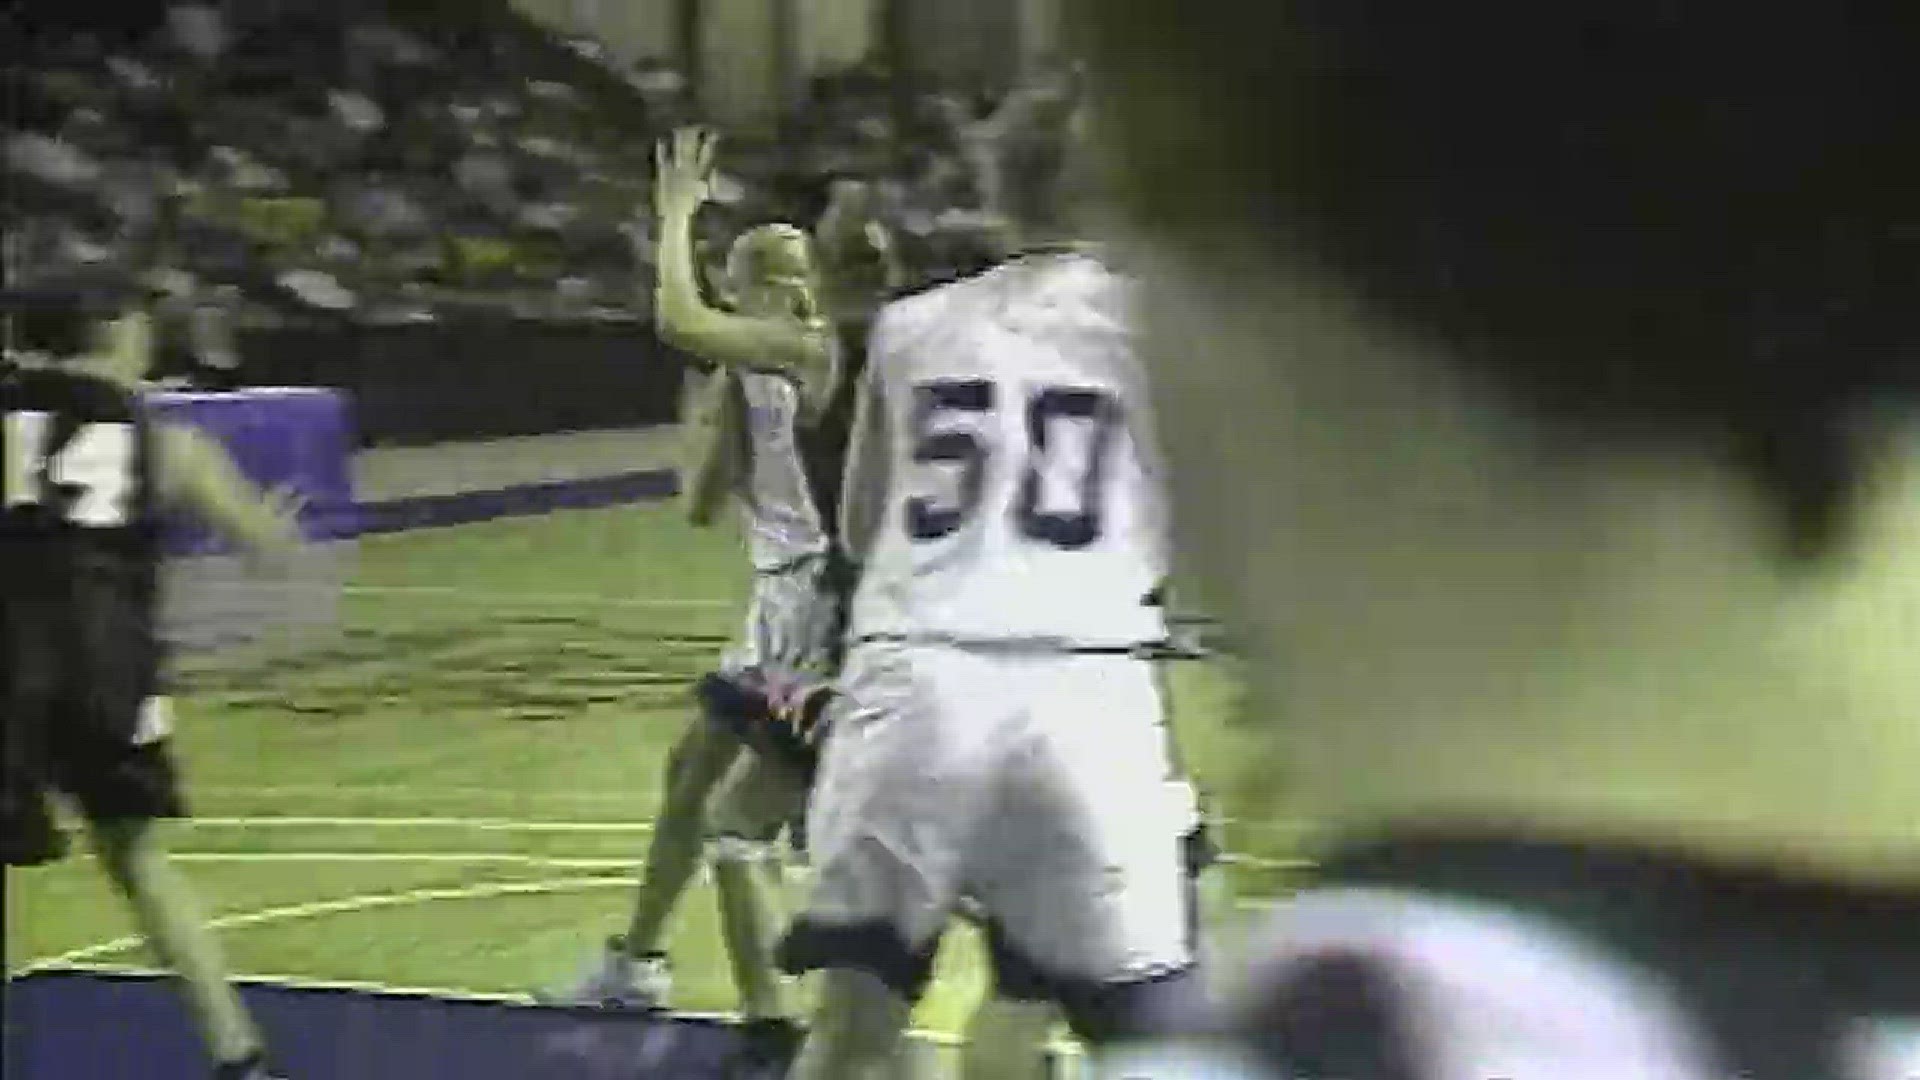 Looking back at a game against Northeastern from Nov. 23, 1997, it's easy to see the talent that would make Cindy Blodgett a UMaine legend and earn her membership in the Maine Basketball Hall of Fame